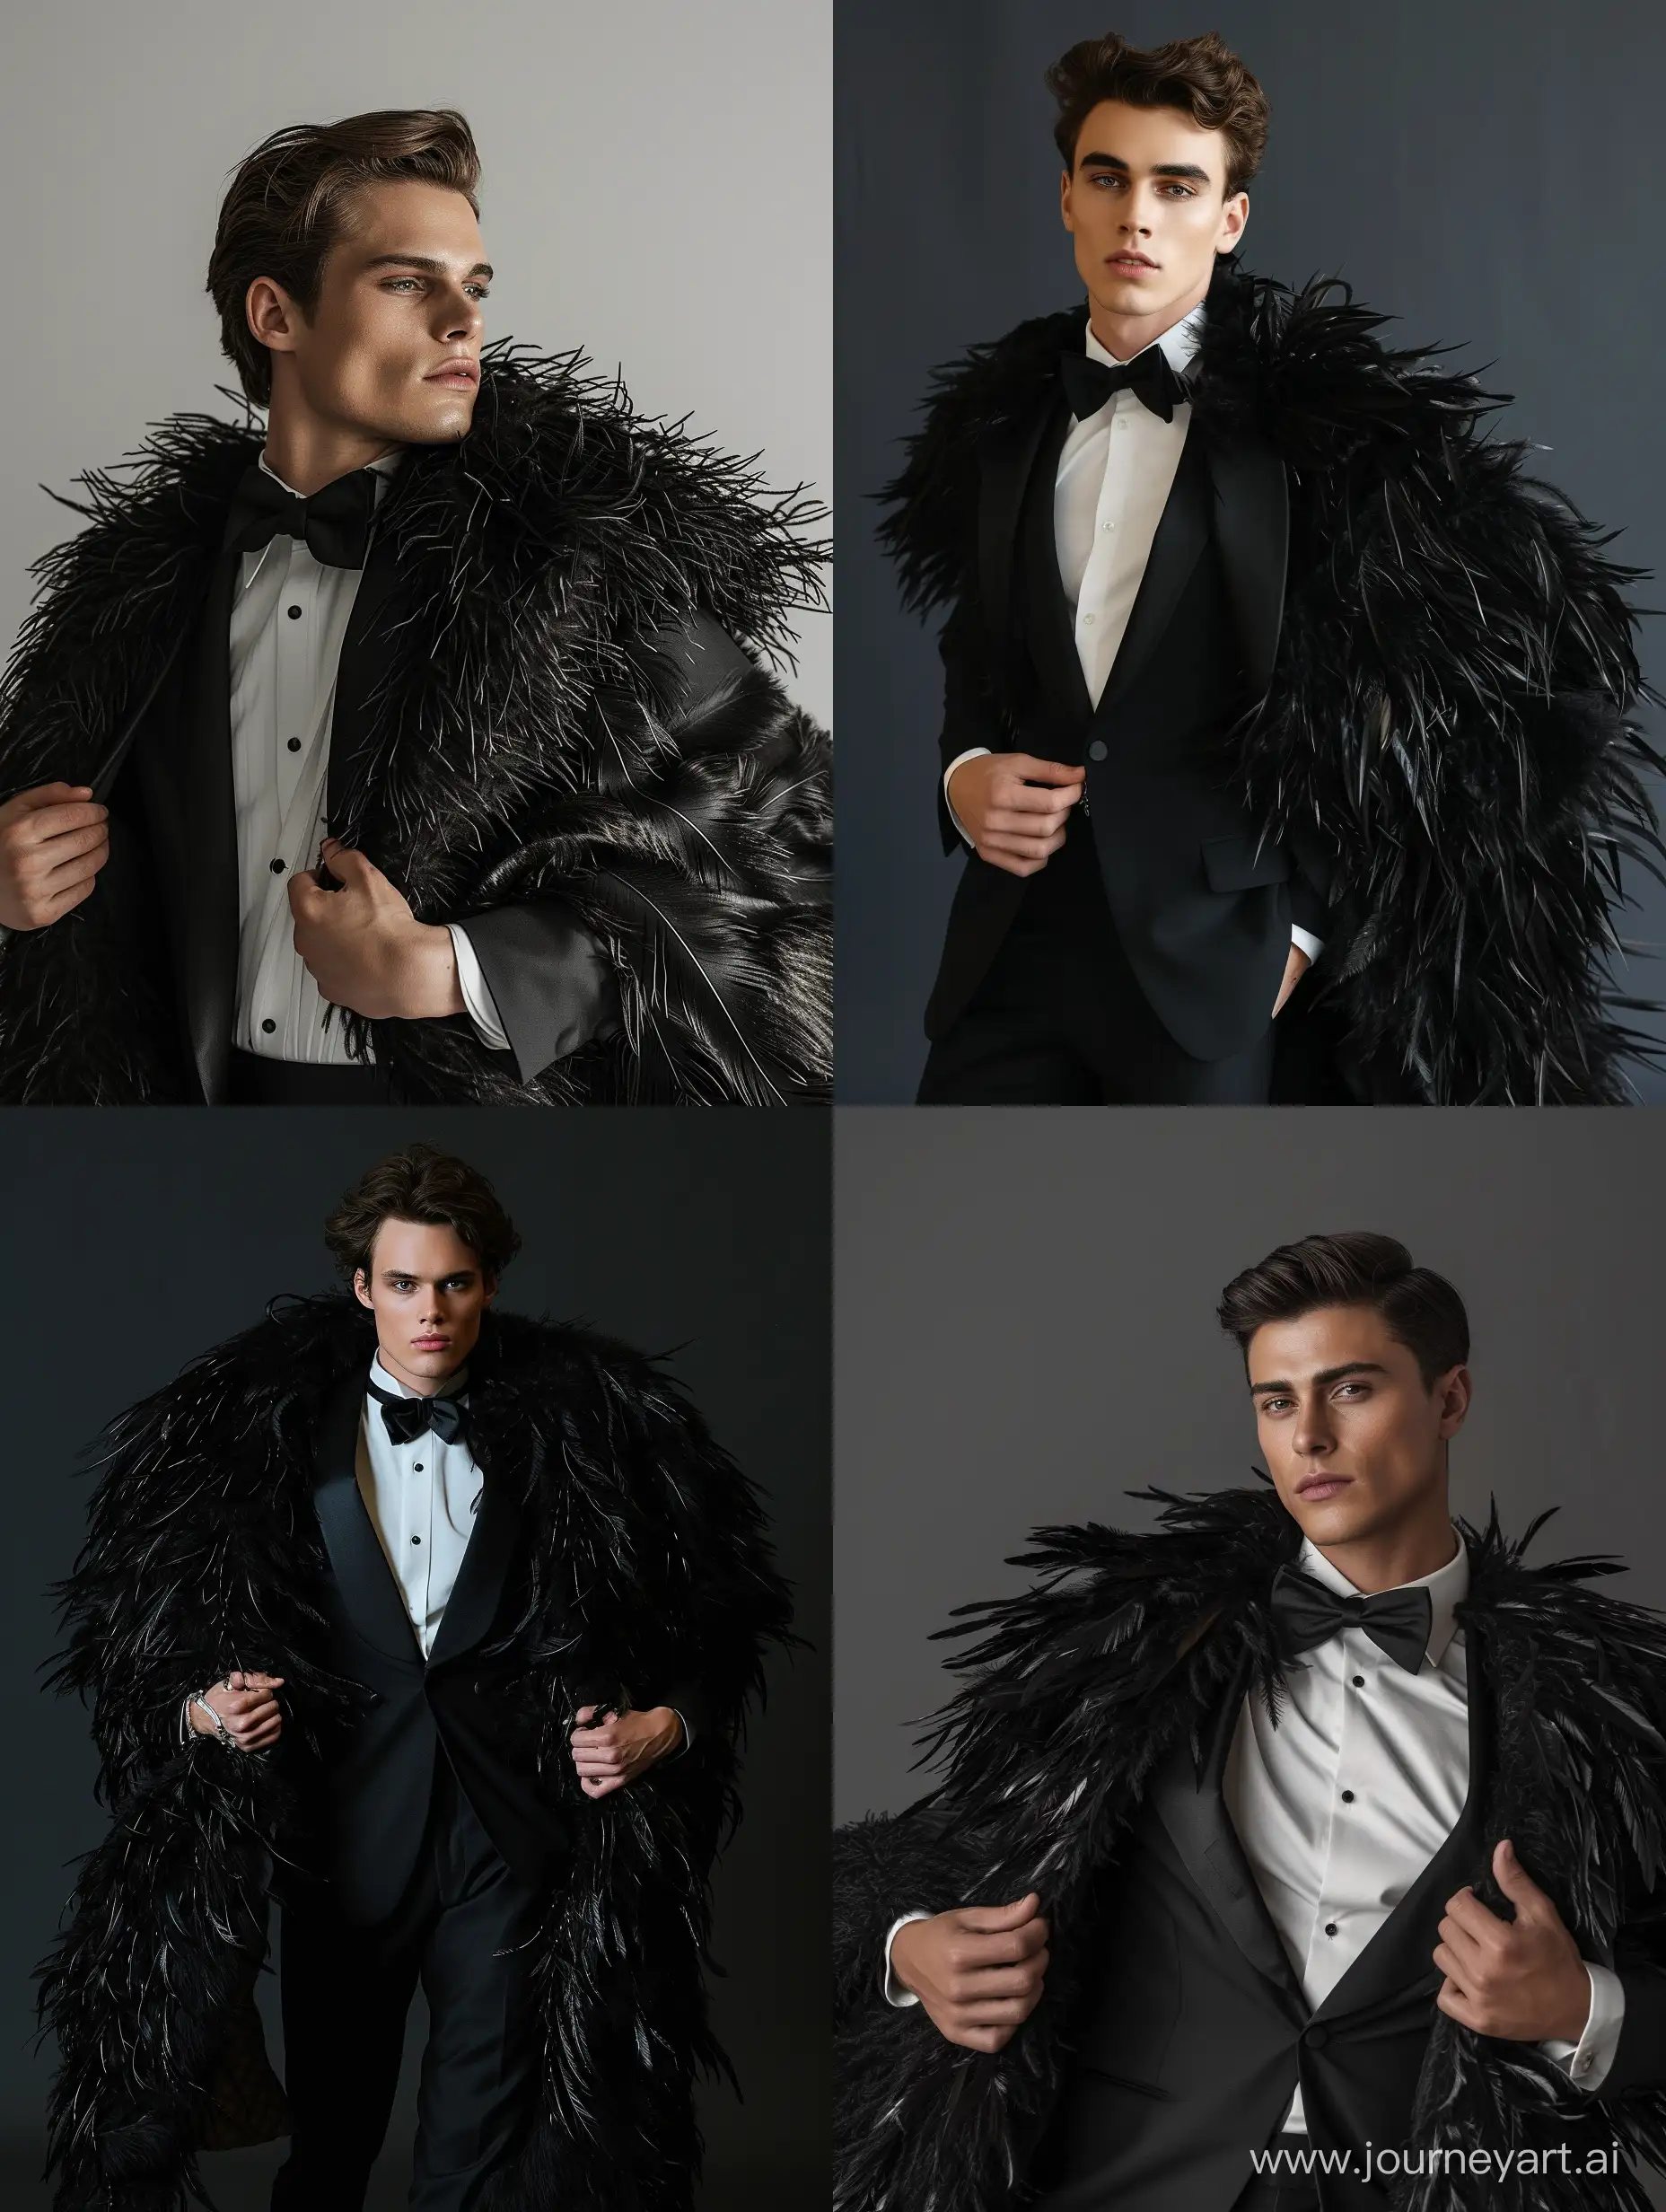 Stylish 20YearOld in Black Tuxedo and Ostrich Feather Fur Coat Old ...